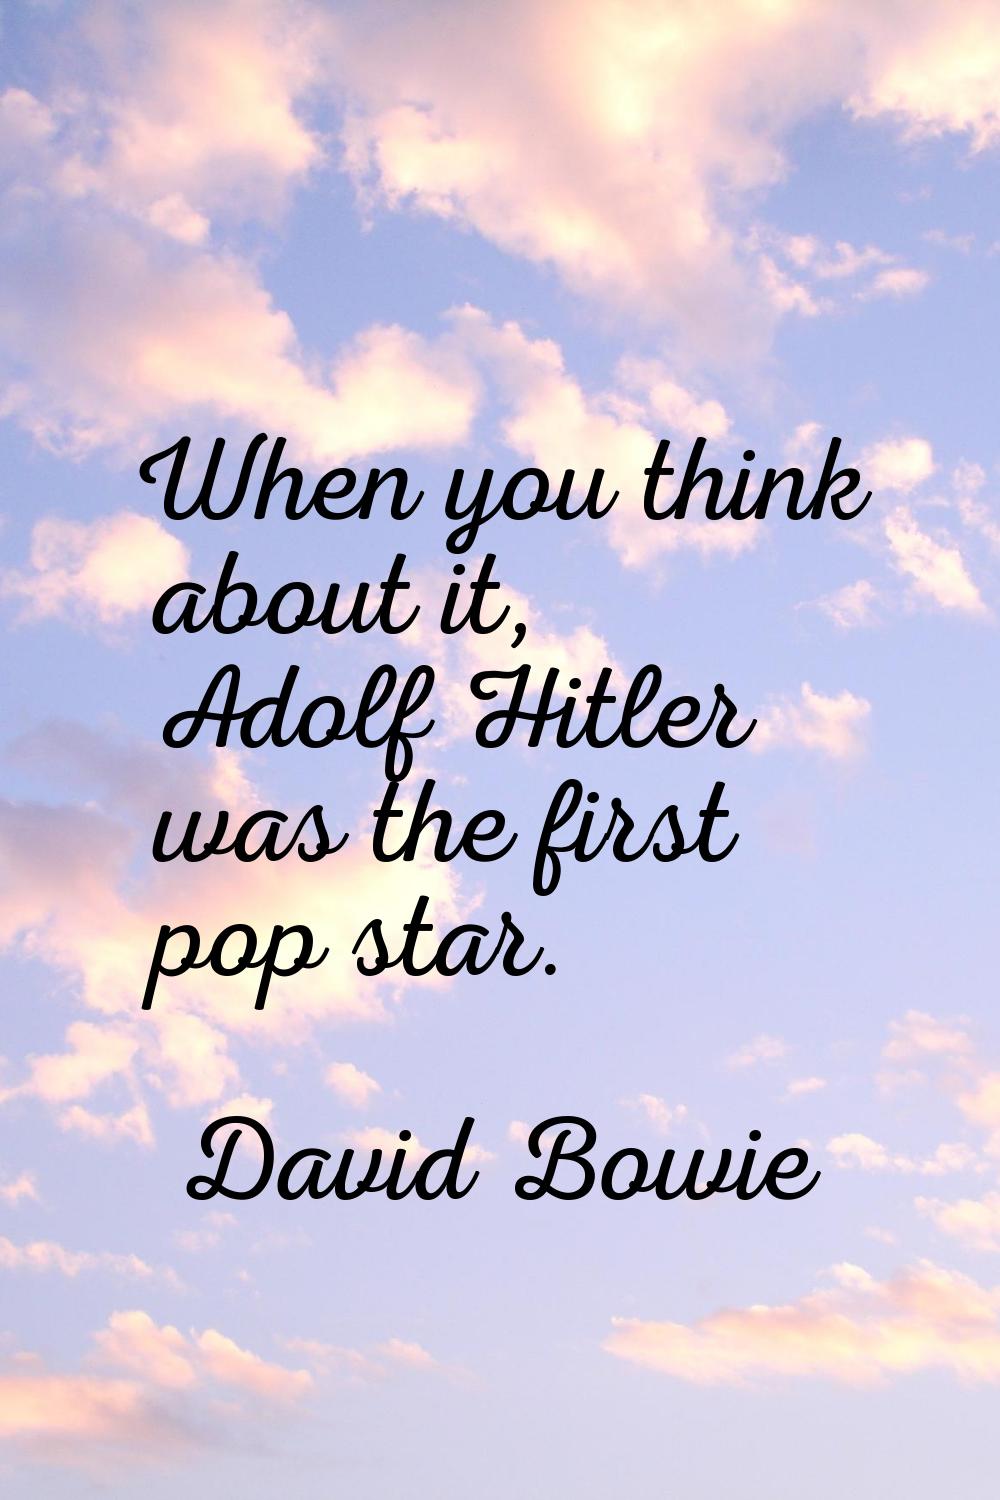 When you think about it, Adolf Hitler was the first pop star.